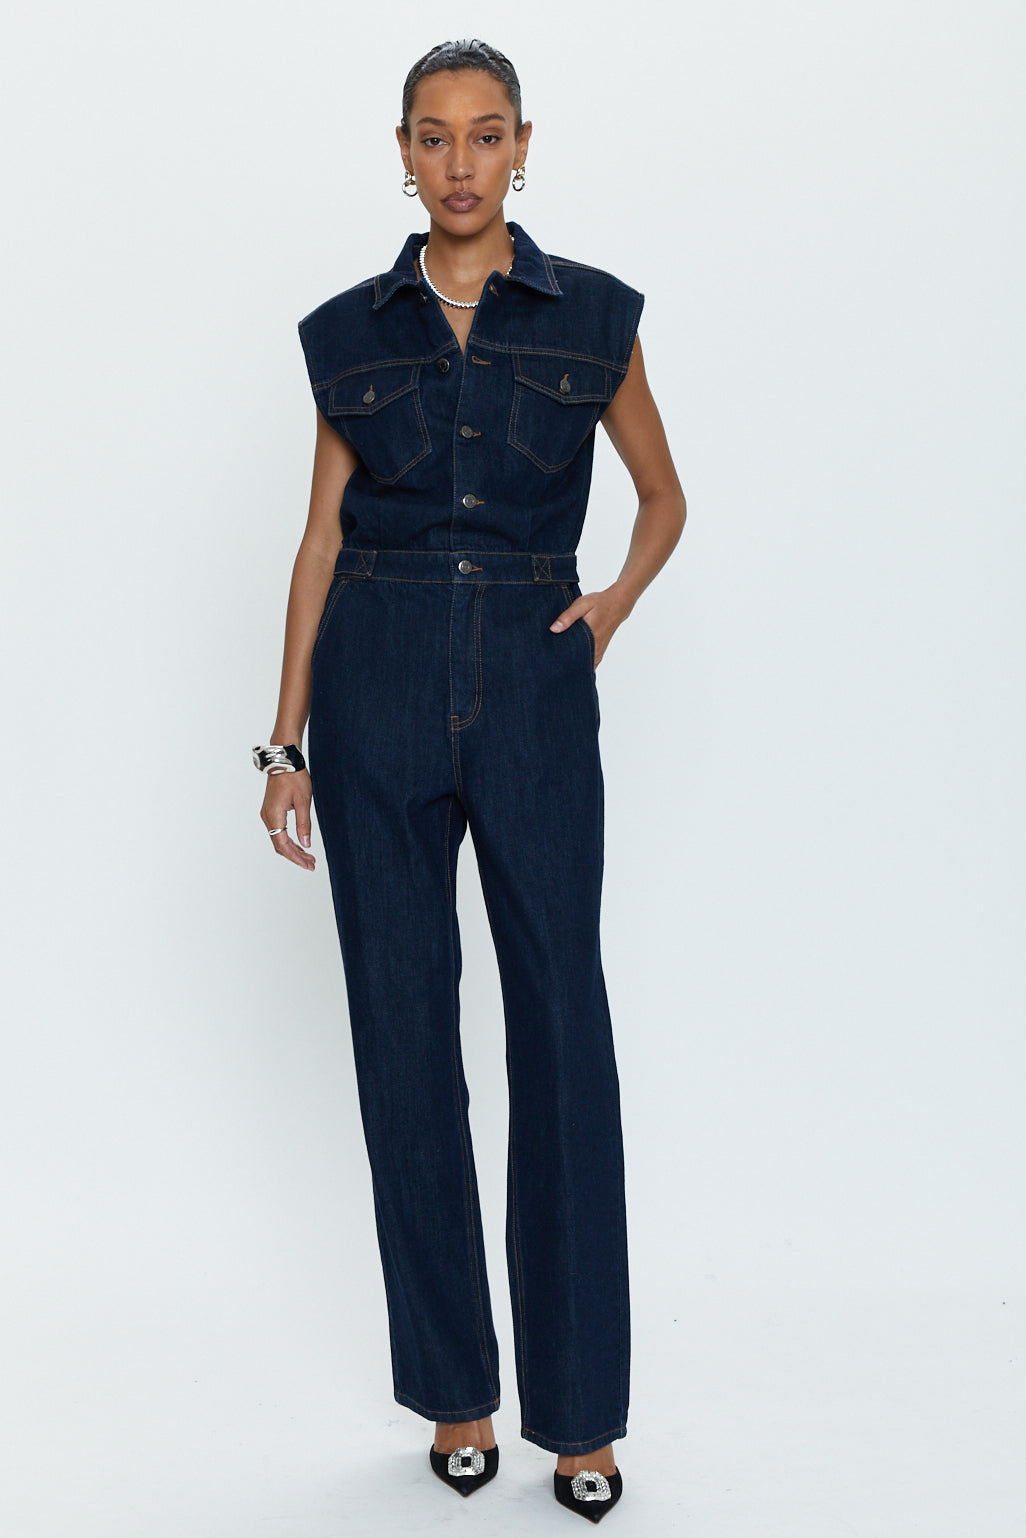 Denim Coverall Jumpsuit: Six Fall Outfits - Michelle Tomczak